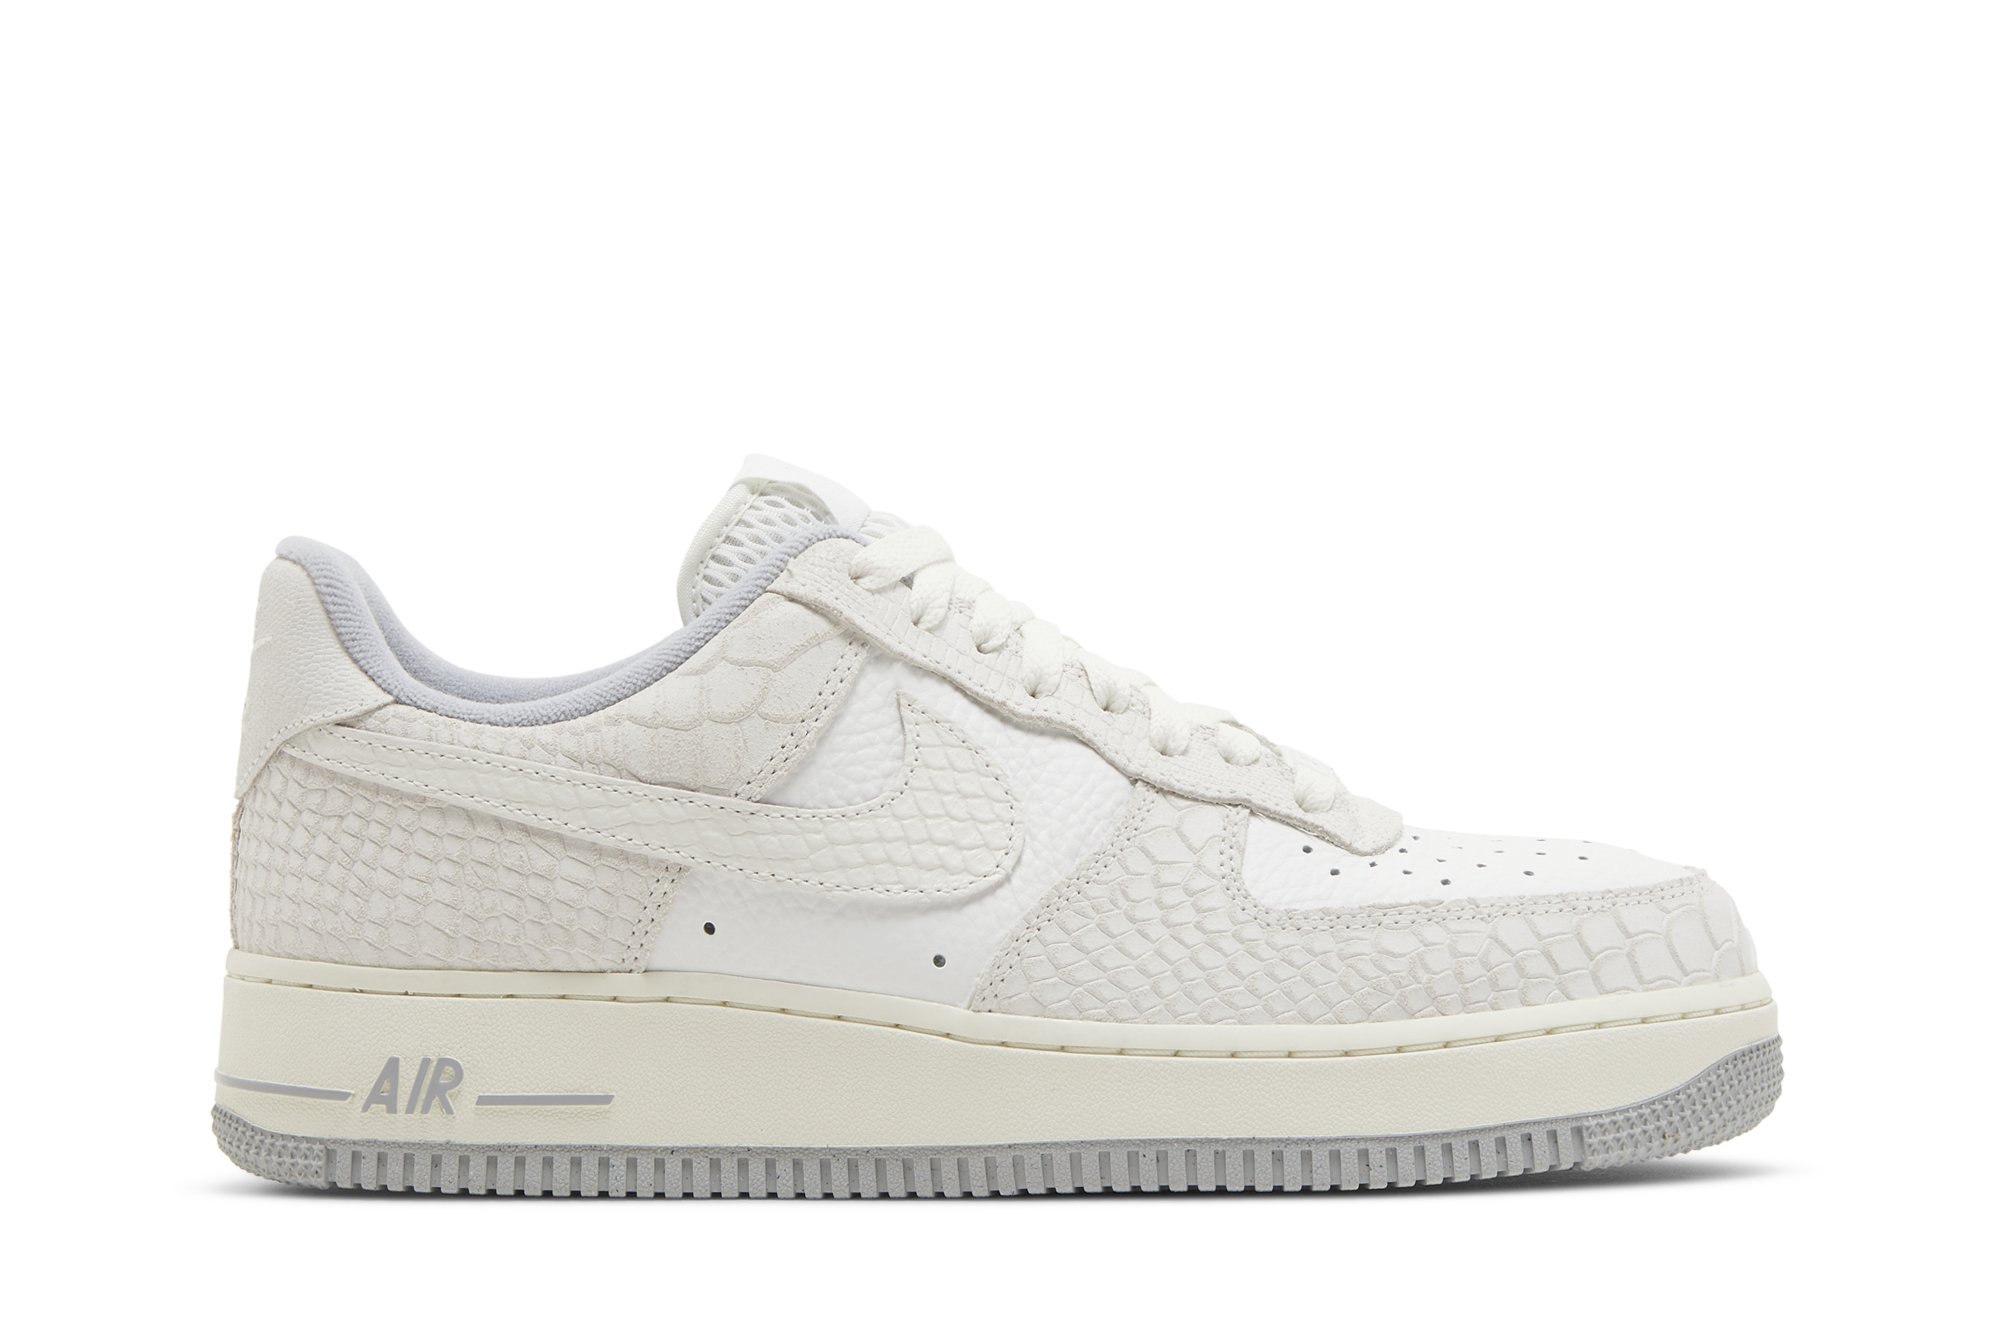 Buy Wmns Air Force 1 '07 'White Python' - DX2678 100 | GOAT